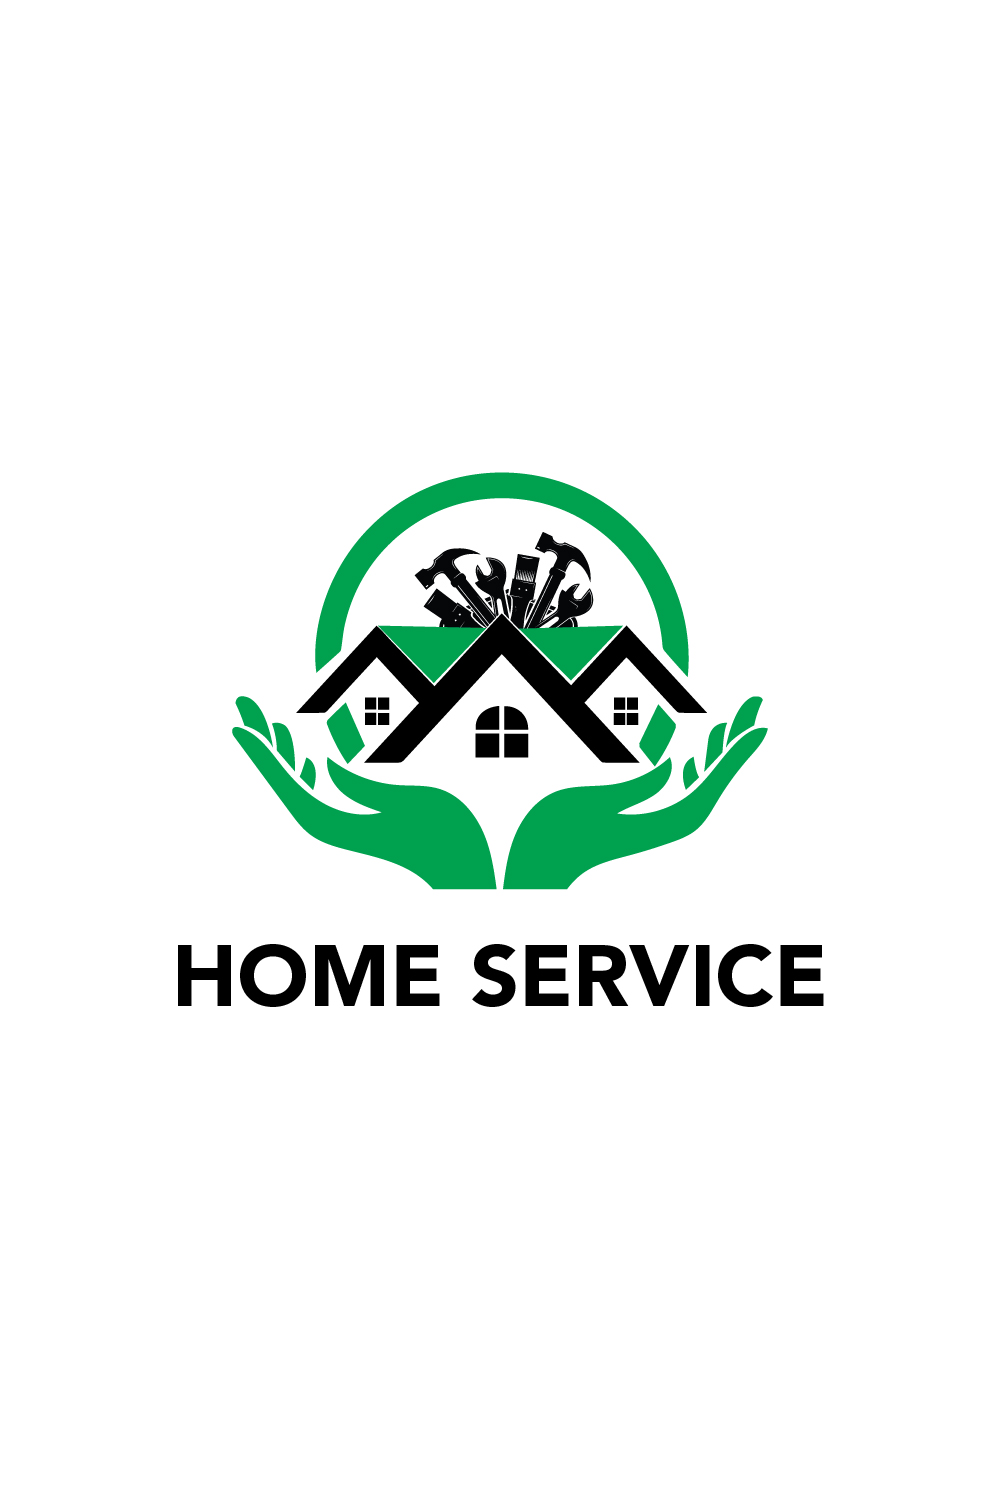 Home service logo pinterest preview image.